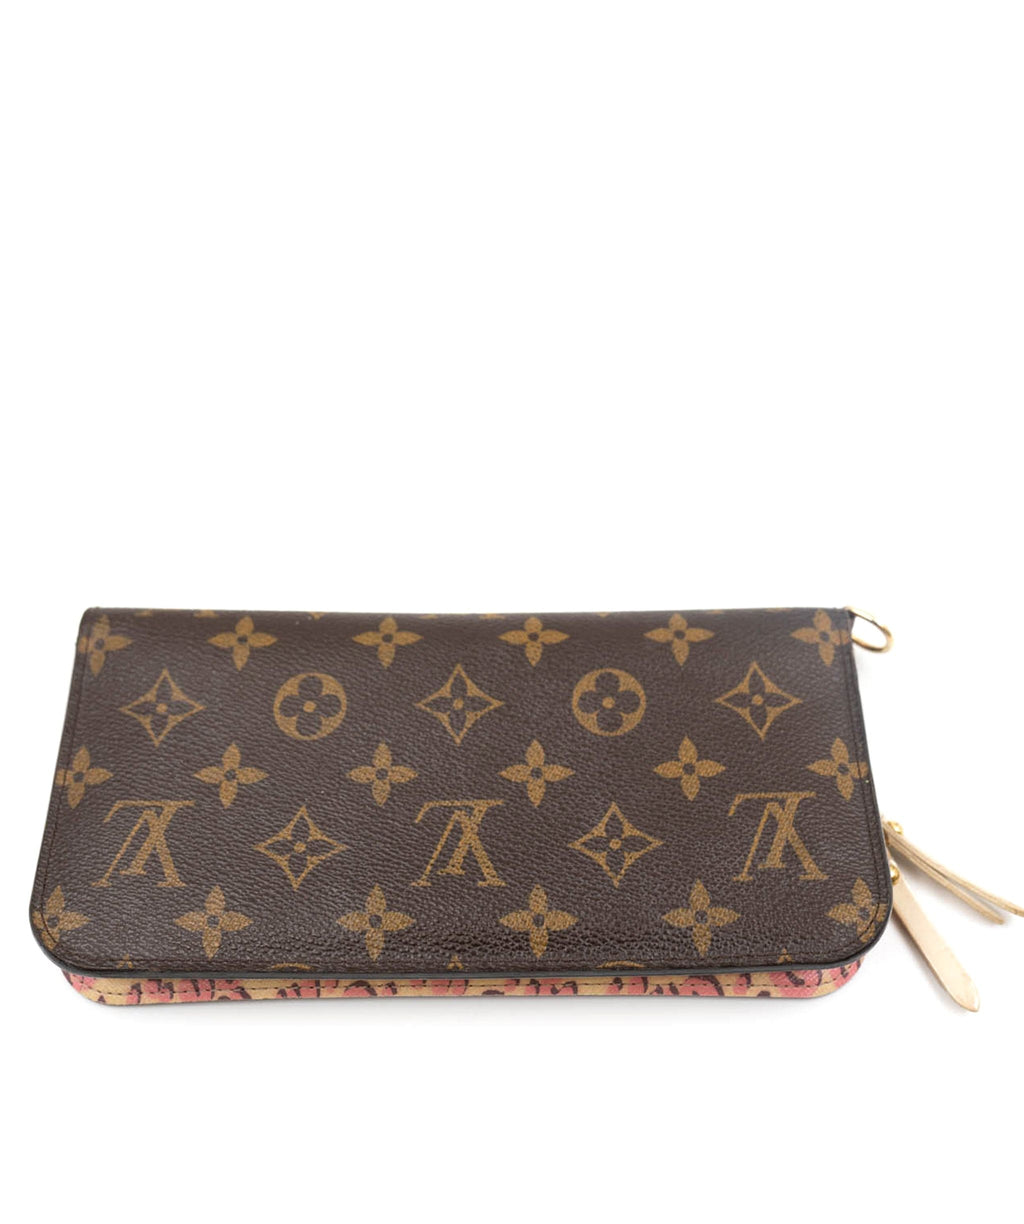 Louis vuitton authentic custom wallet with pink inside heart